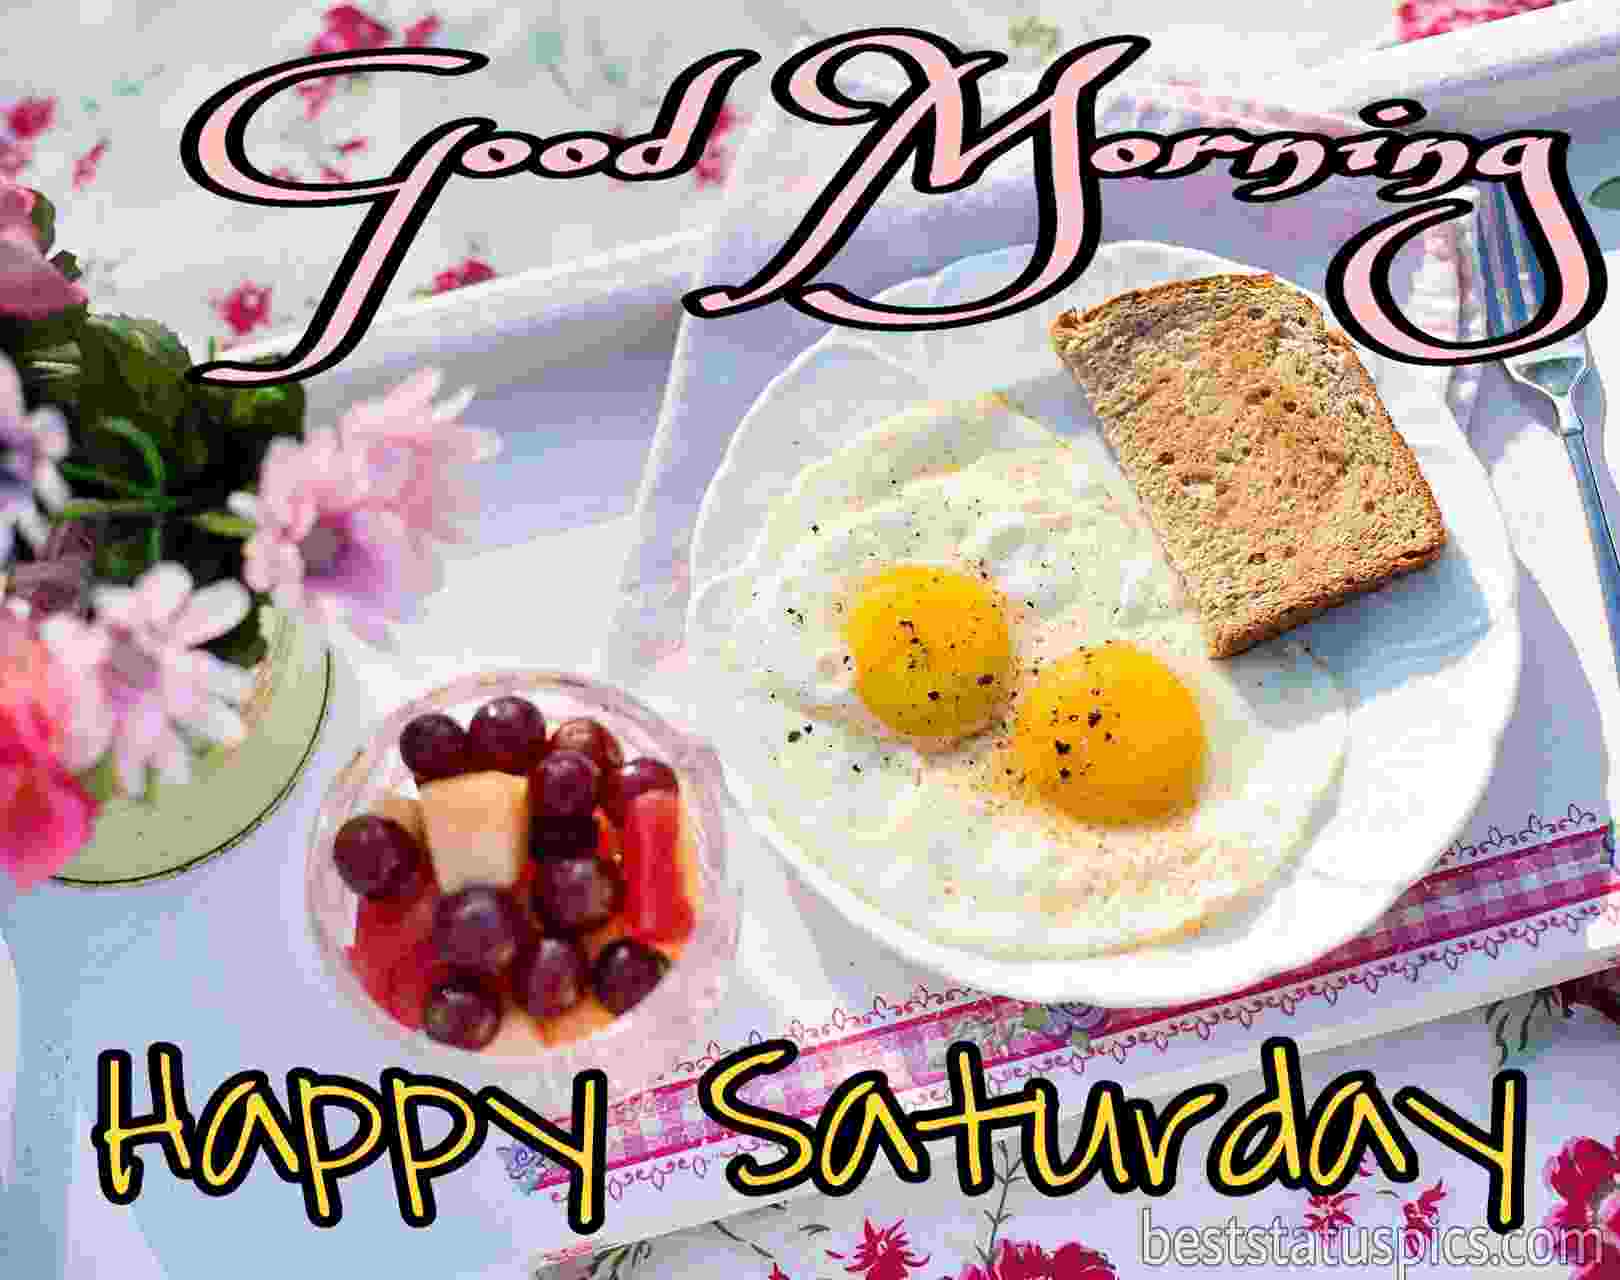 41+ Good Morning Happy Saturday Images HD 2021 | Best ...